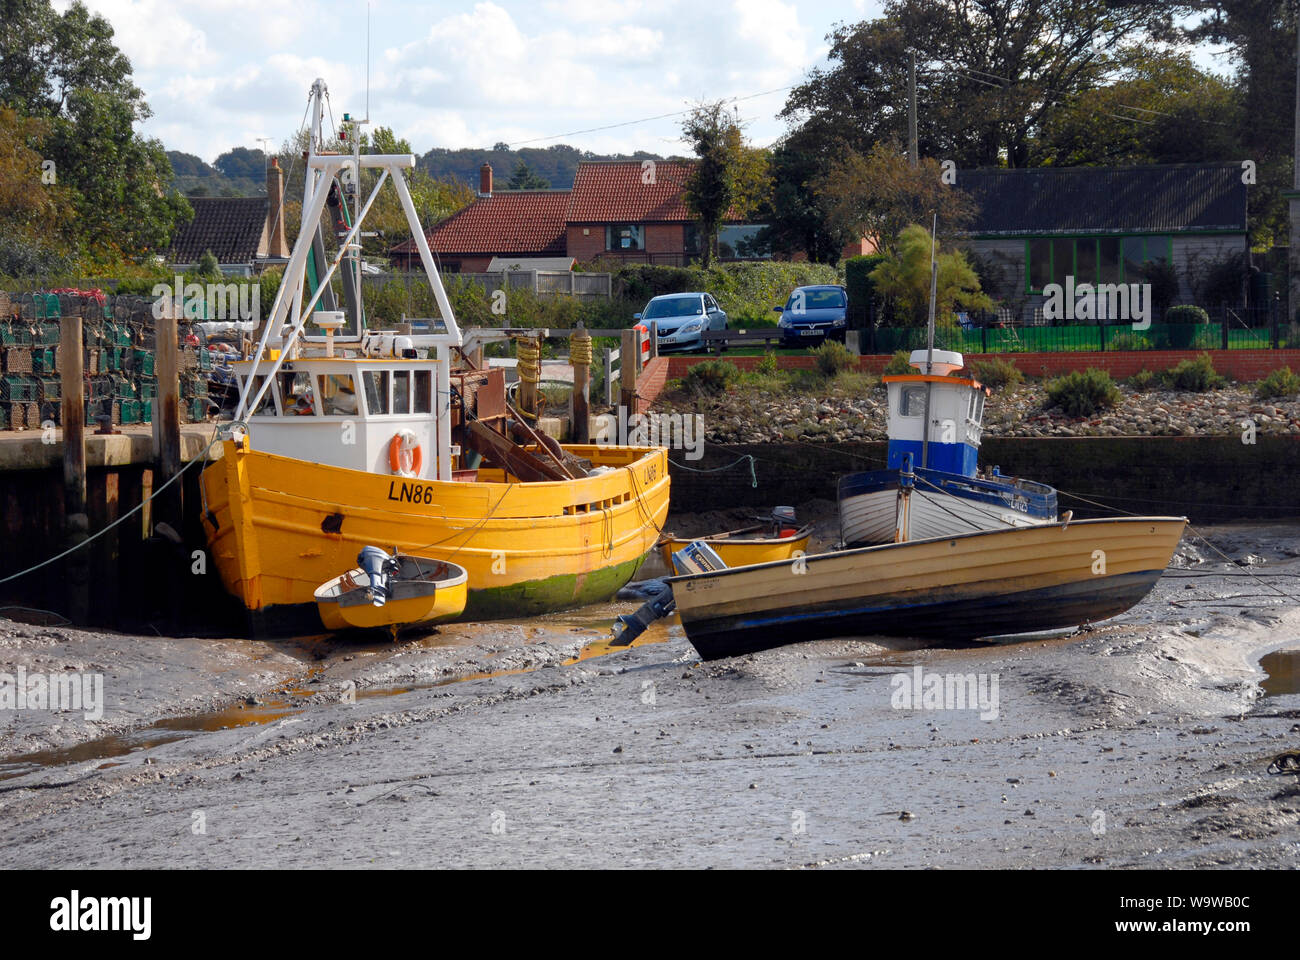 Lord Sam, registered at Kings Lynn, moored at Brancaster Staithe, on the north Norfolk coast, at low tide Stock Photo